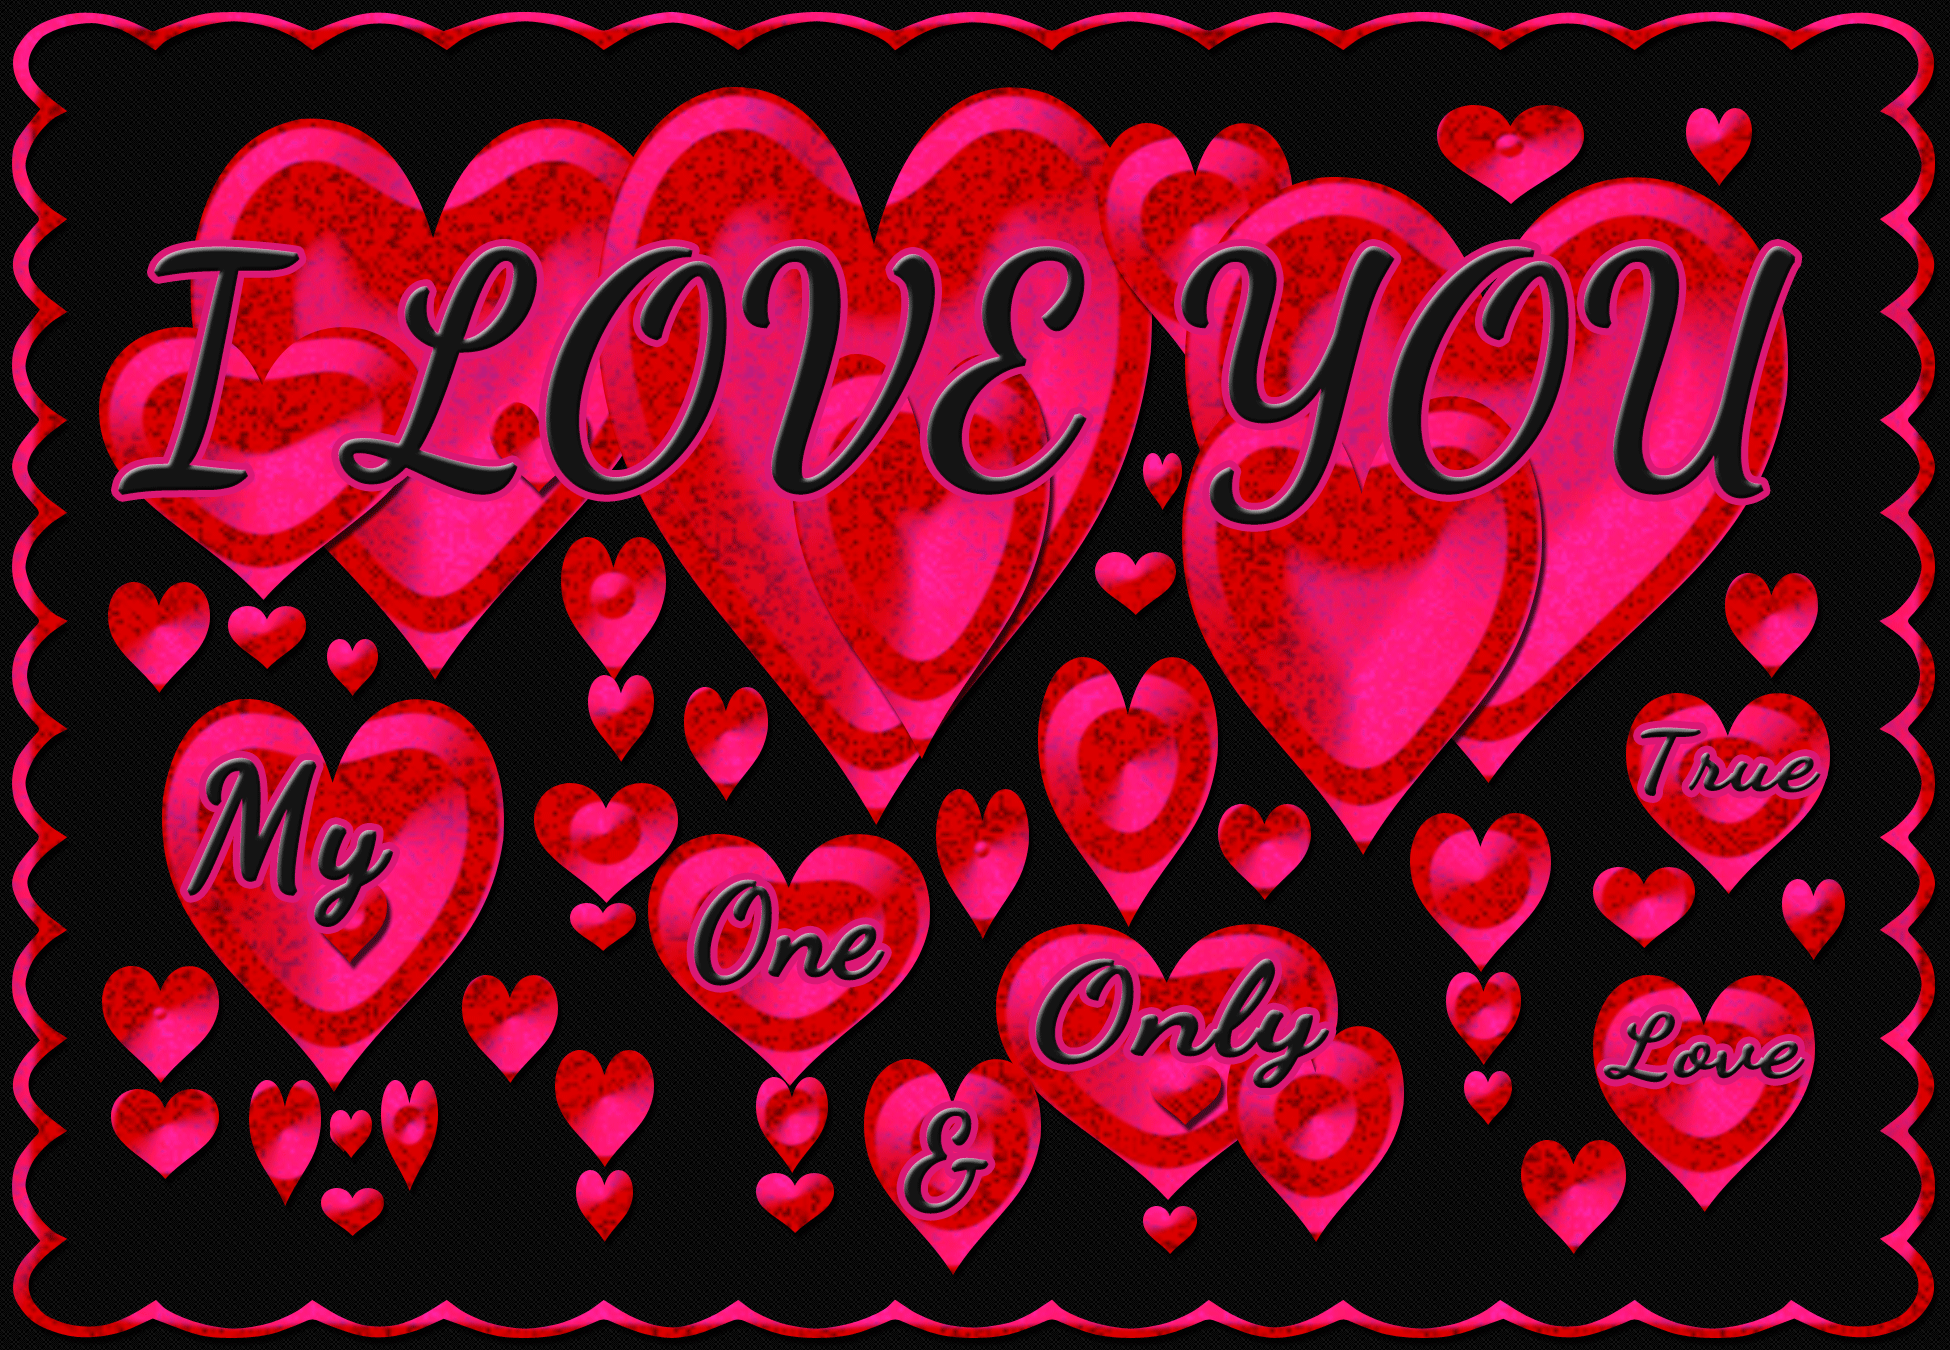 babe i love you wallpapers